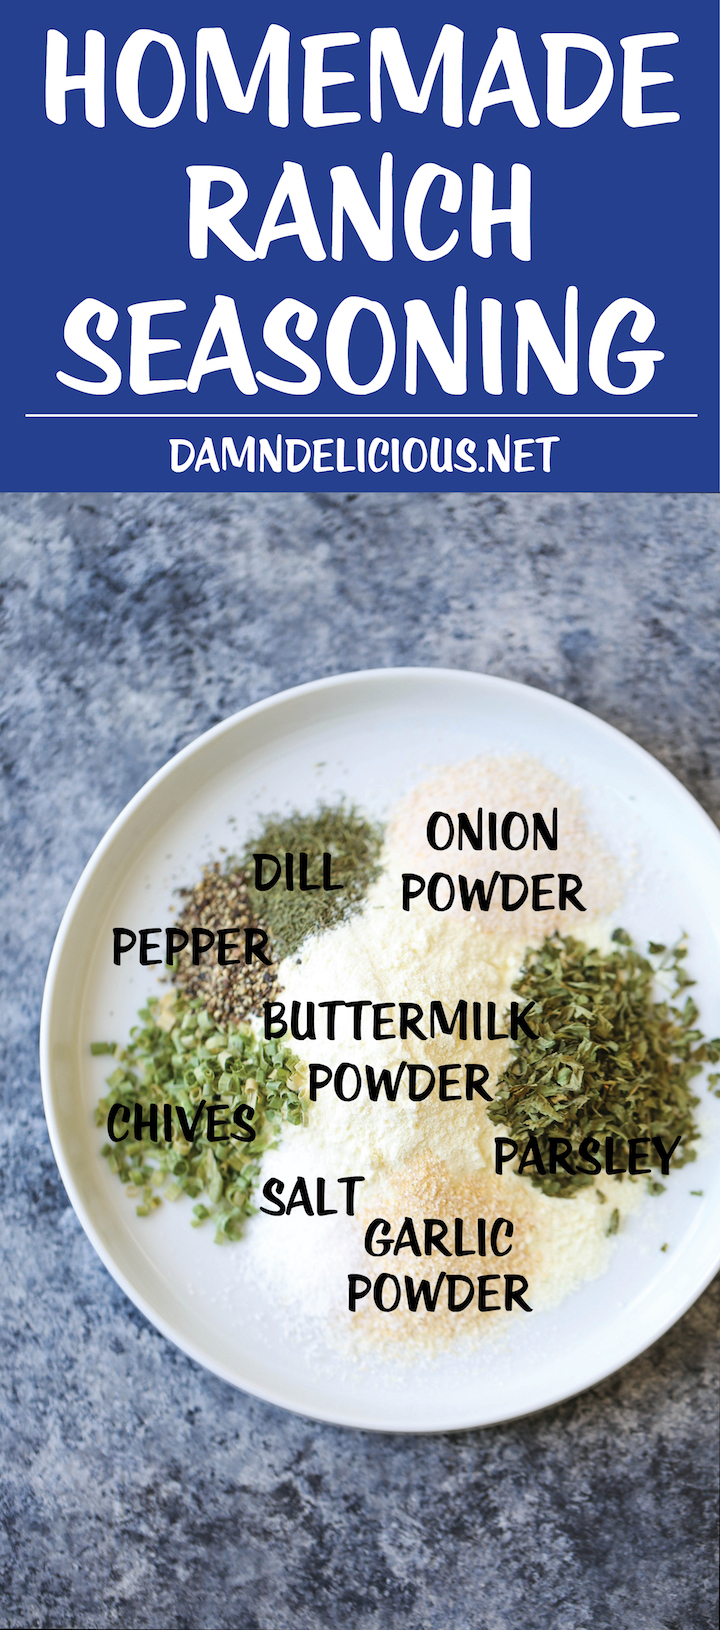 DIY Homemade Ranch Seasoning Mix - You can skip the store-bought seasoning packets. This homemade version takes 5 min using ingredients you already have!